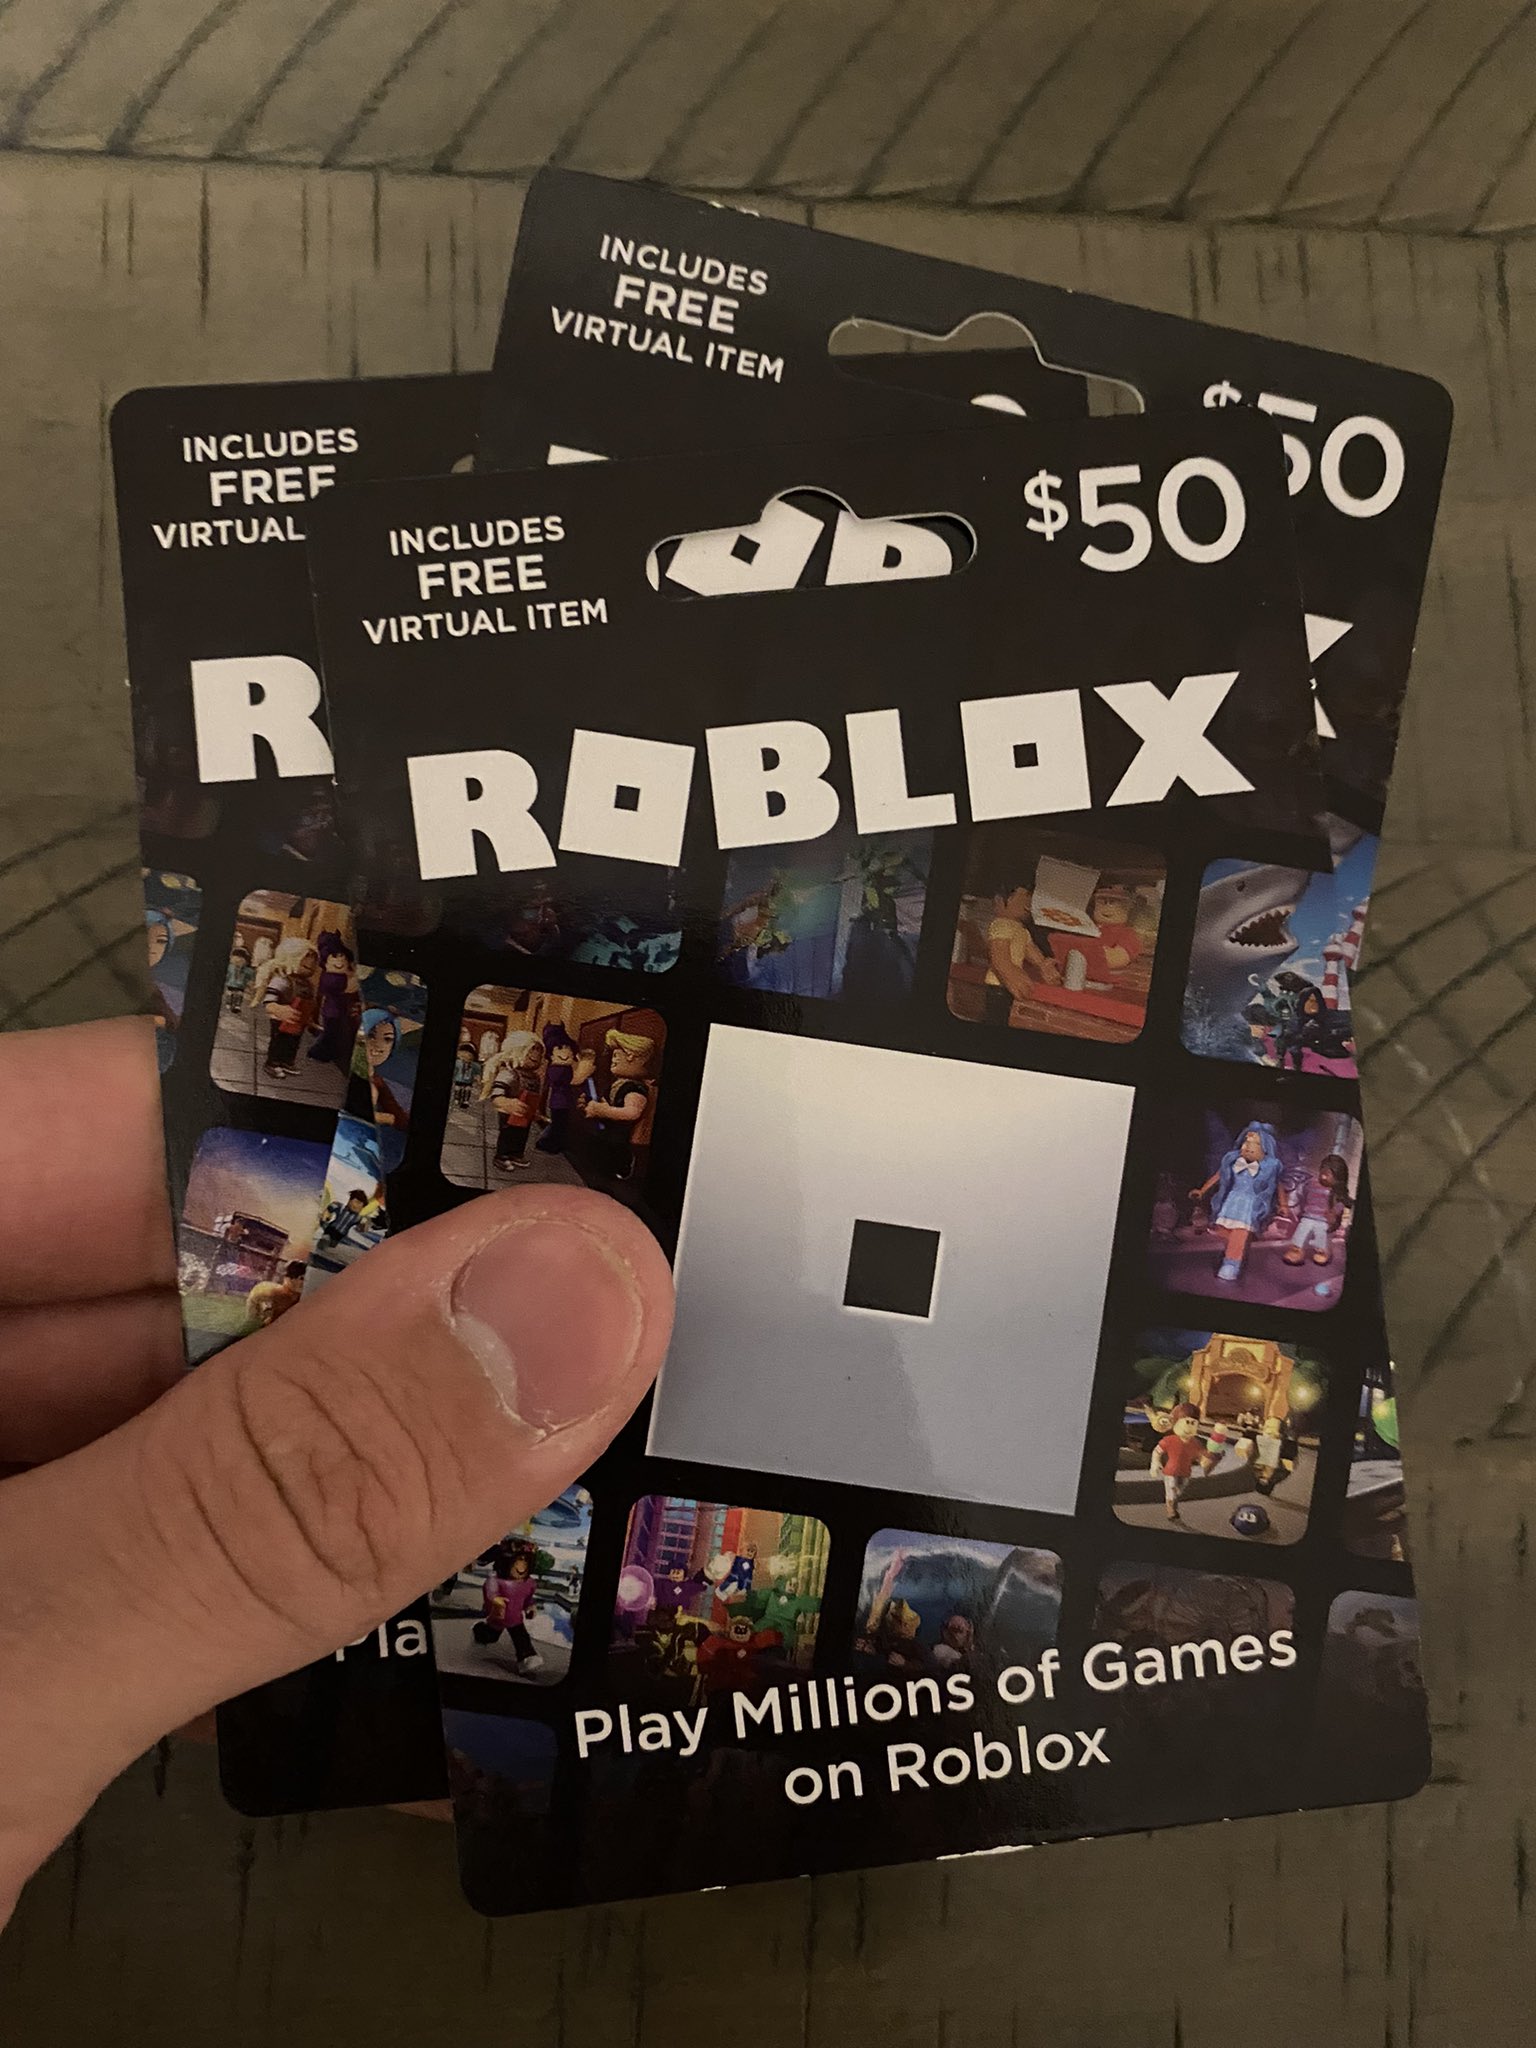 🔴 FREE ROBUX GIFT CARD GIVEAWAY